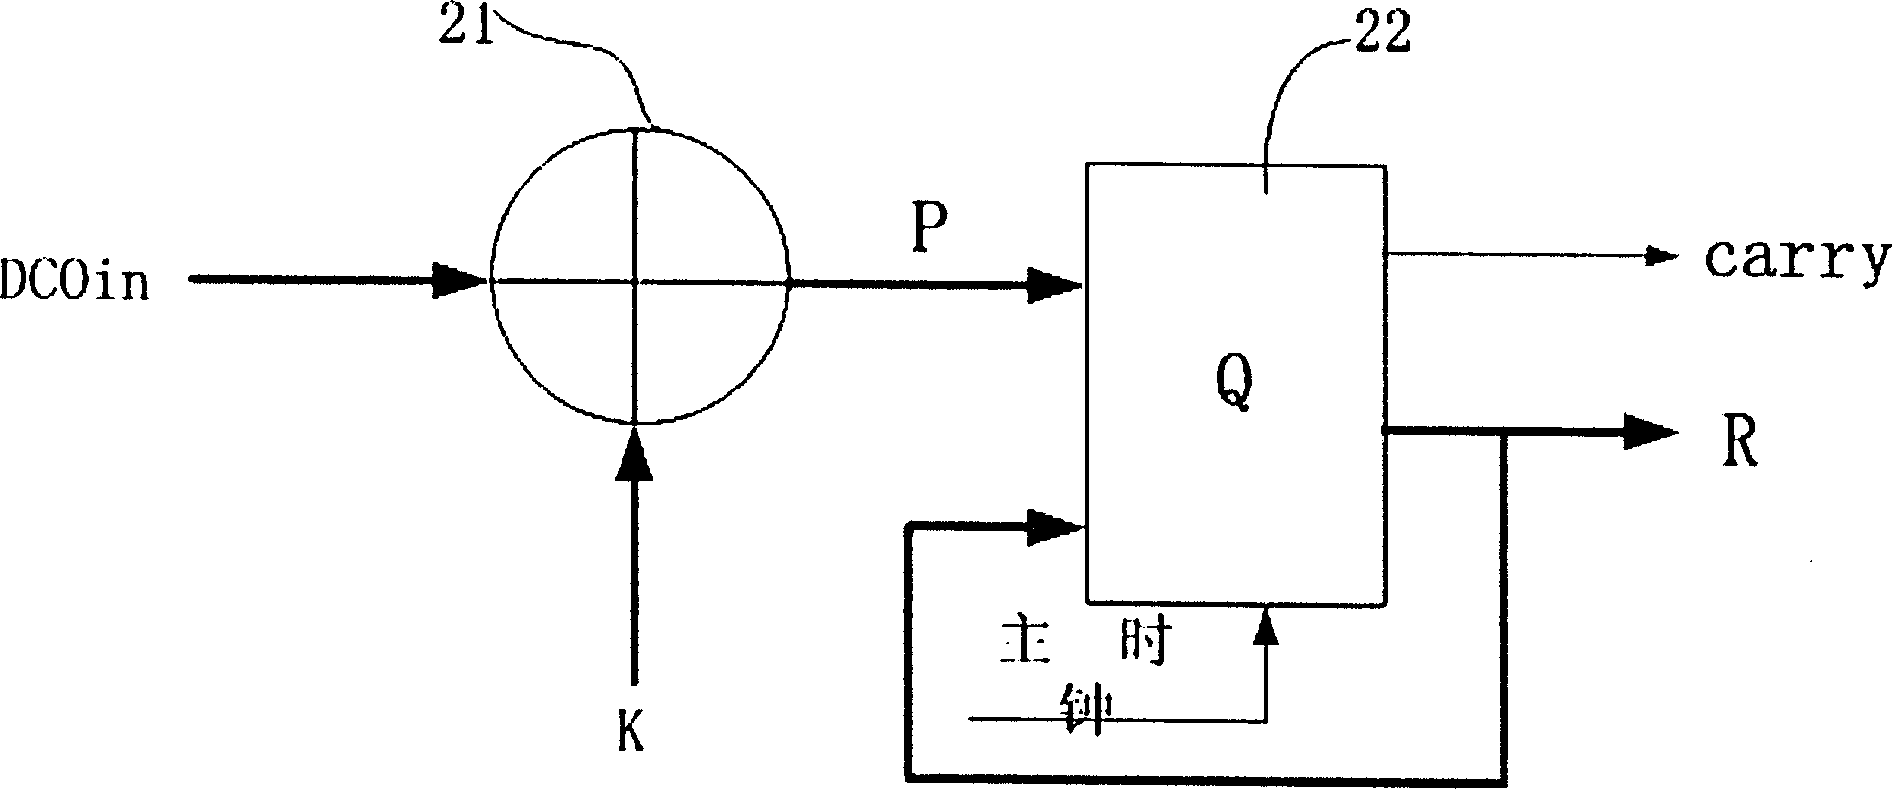 Digital lock phase ring for producing multiple frequency point clock signal using one time delay chain